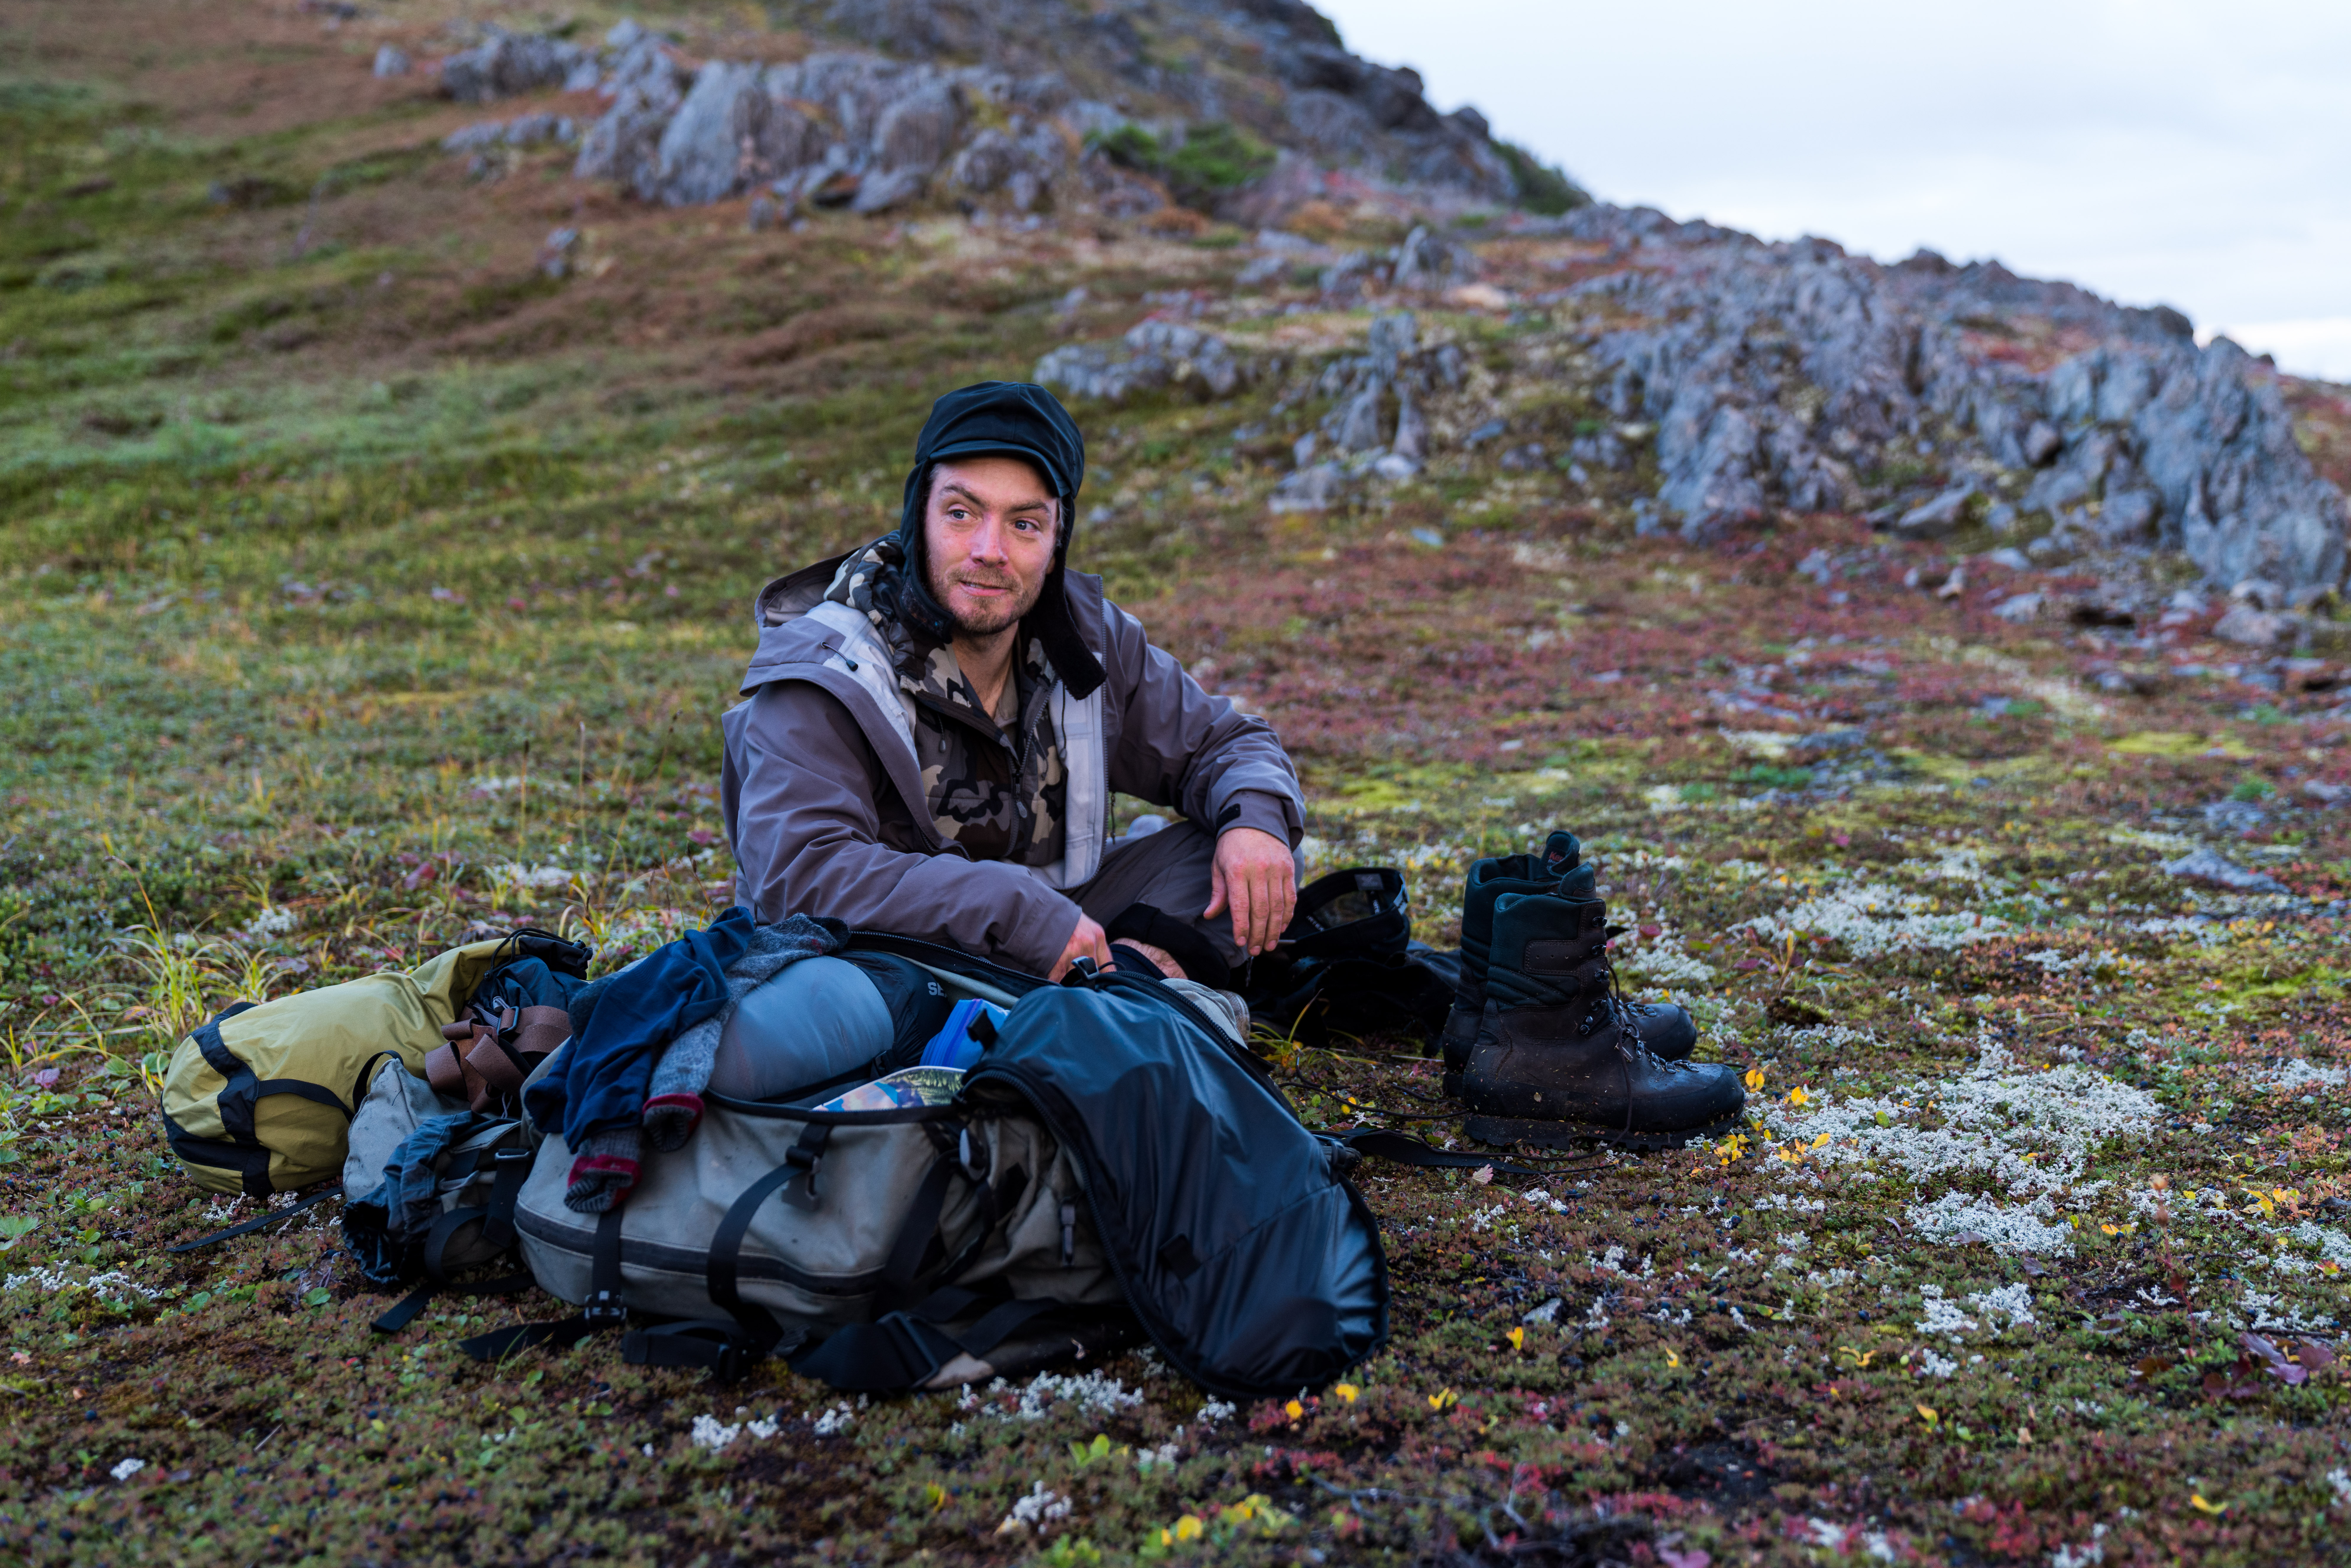 A mountain goat guide rests by his gear.